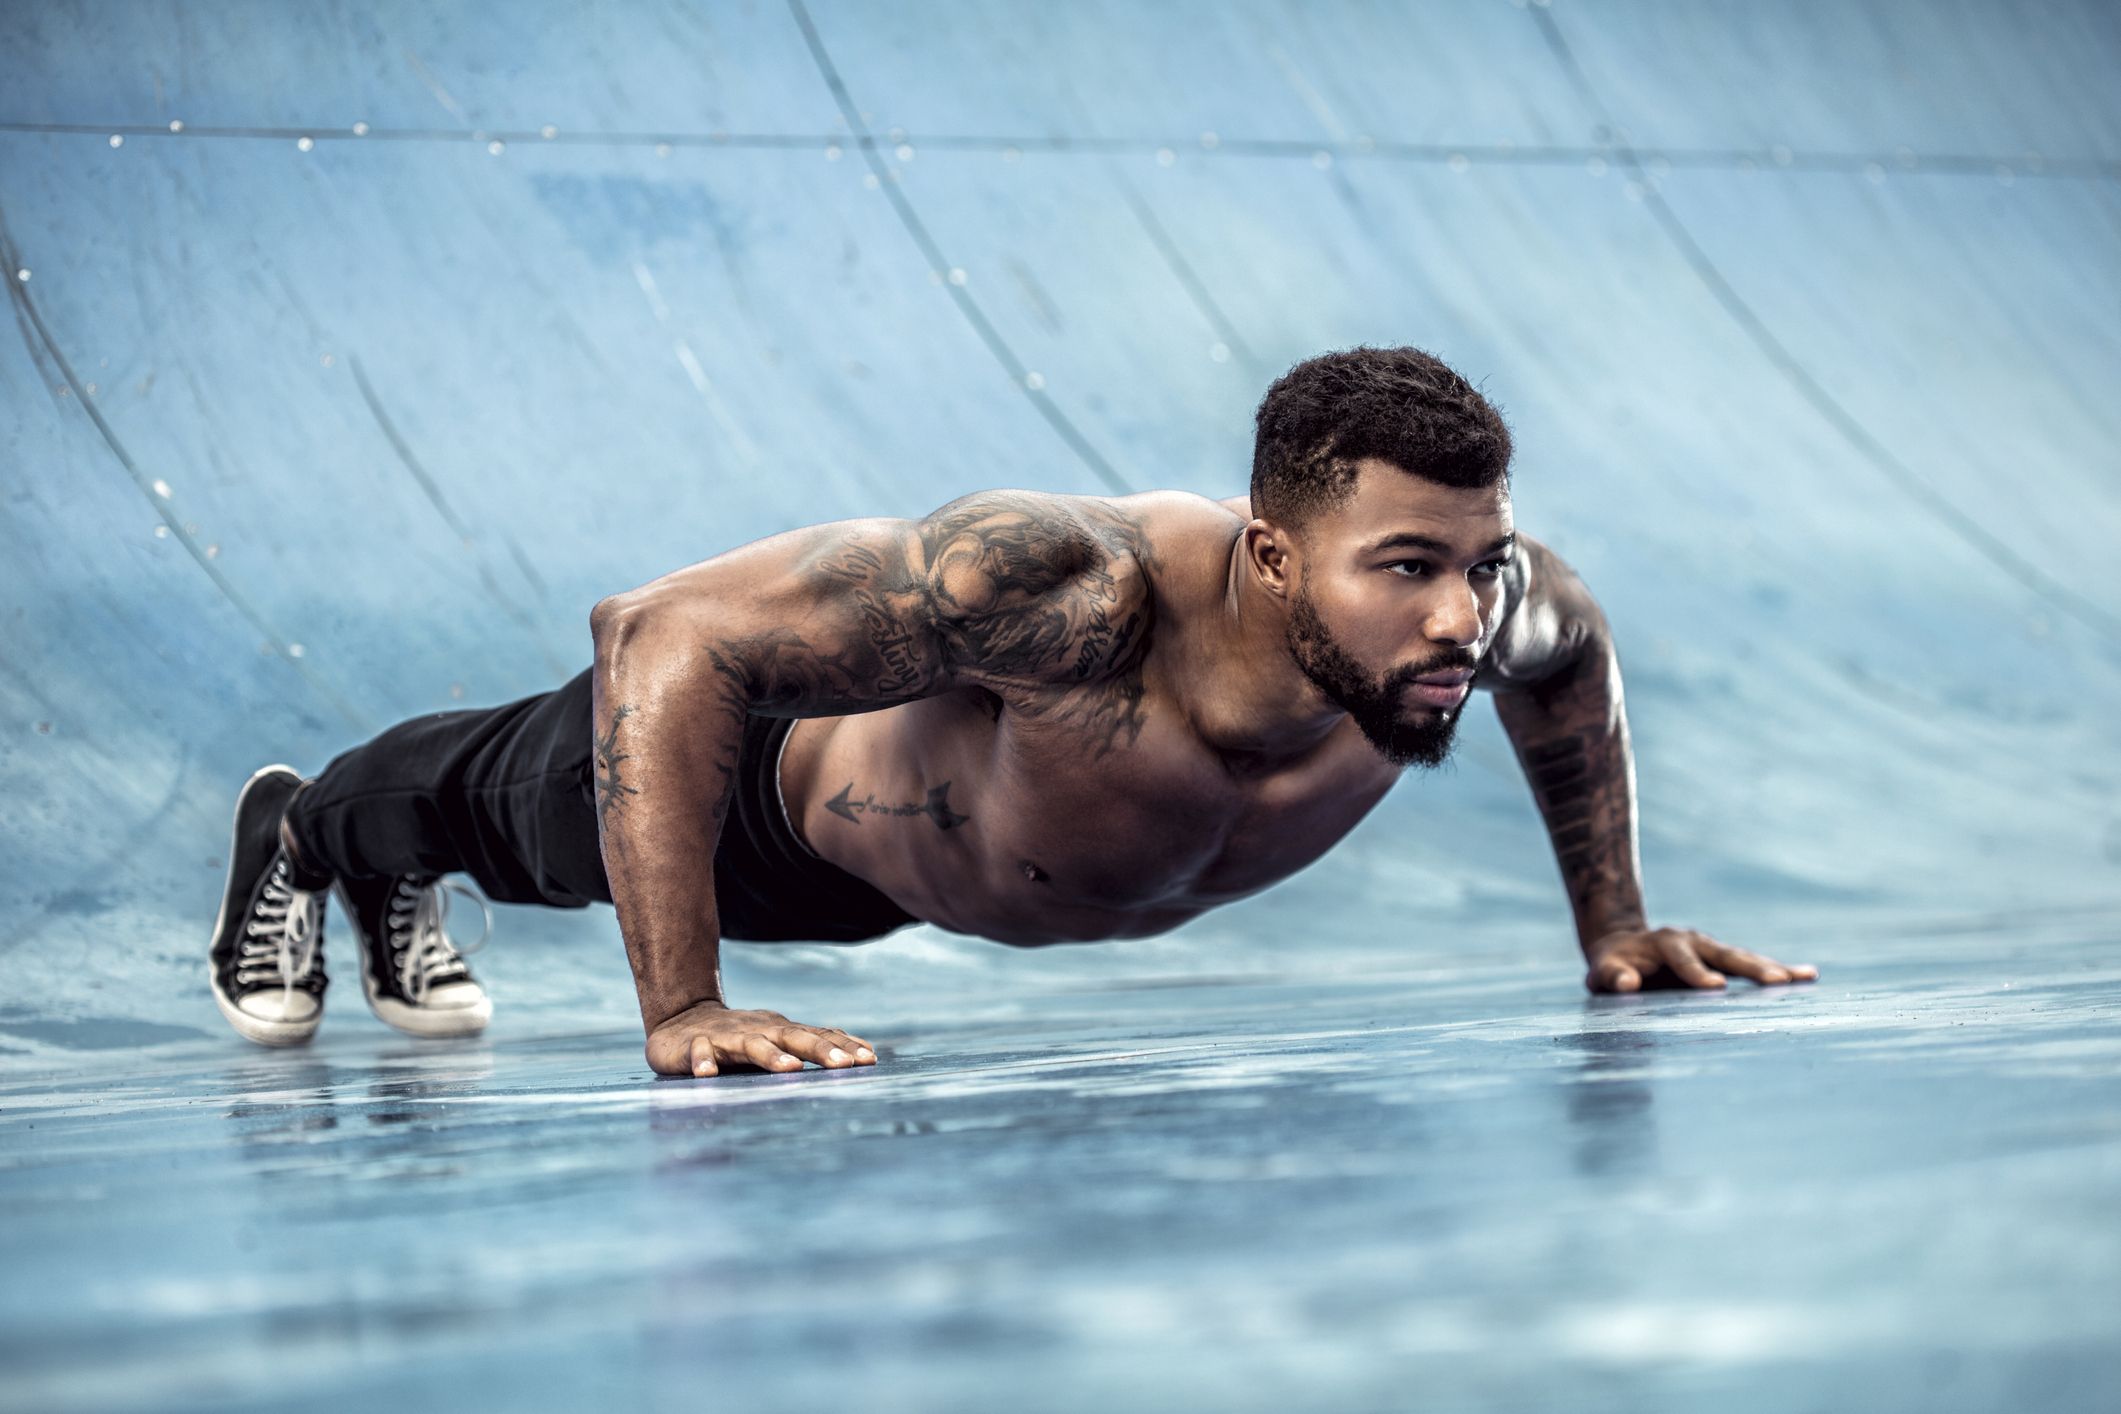 Tutorial: How to Perform An Explosive Push-Up